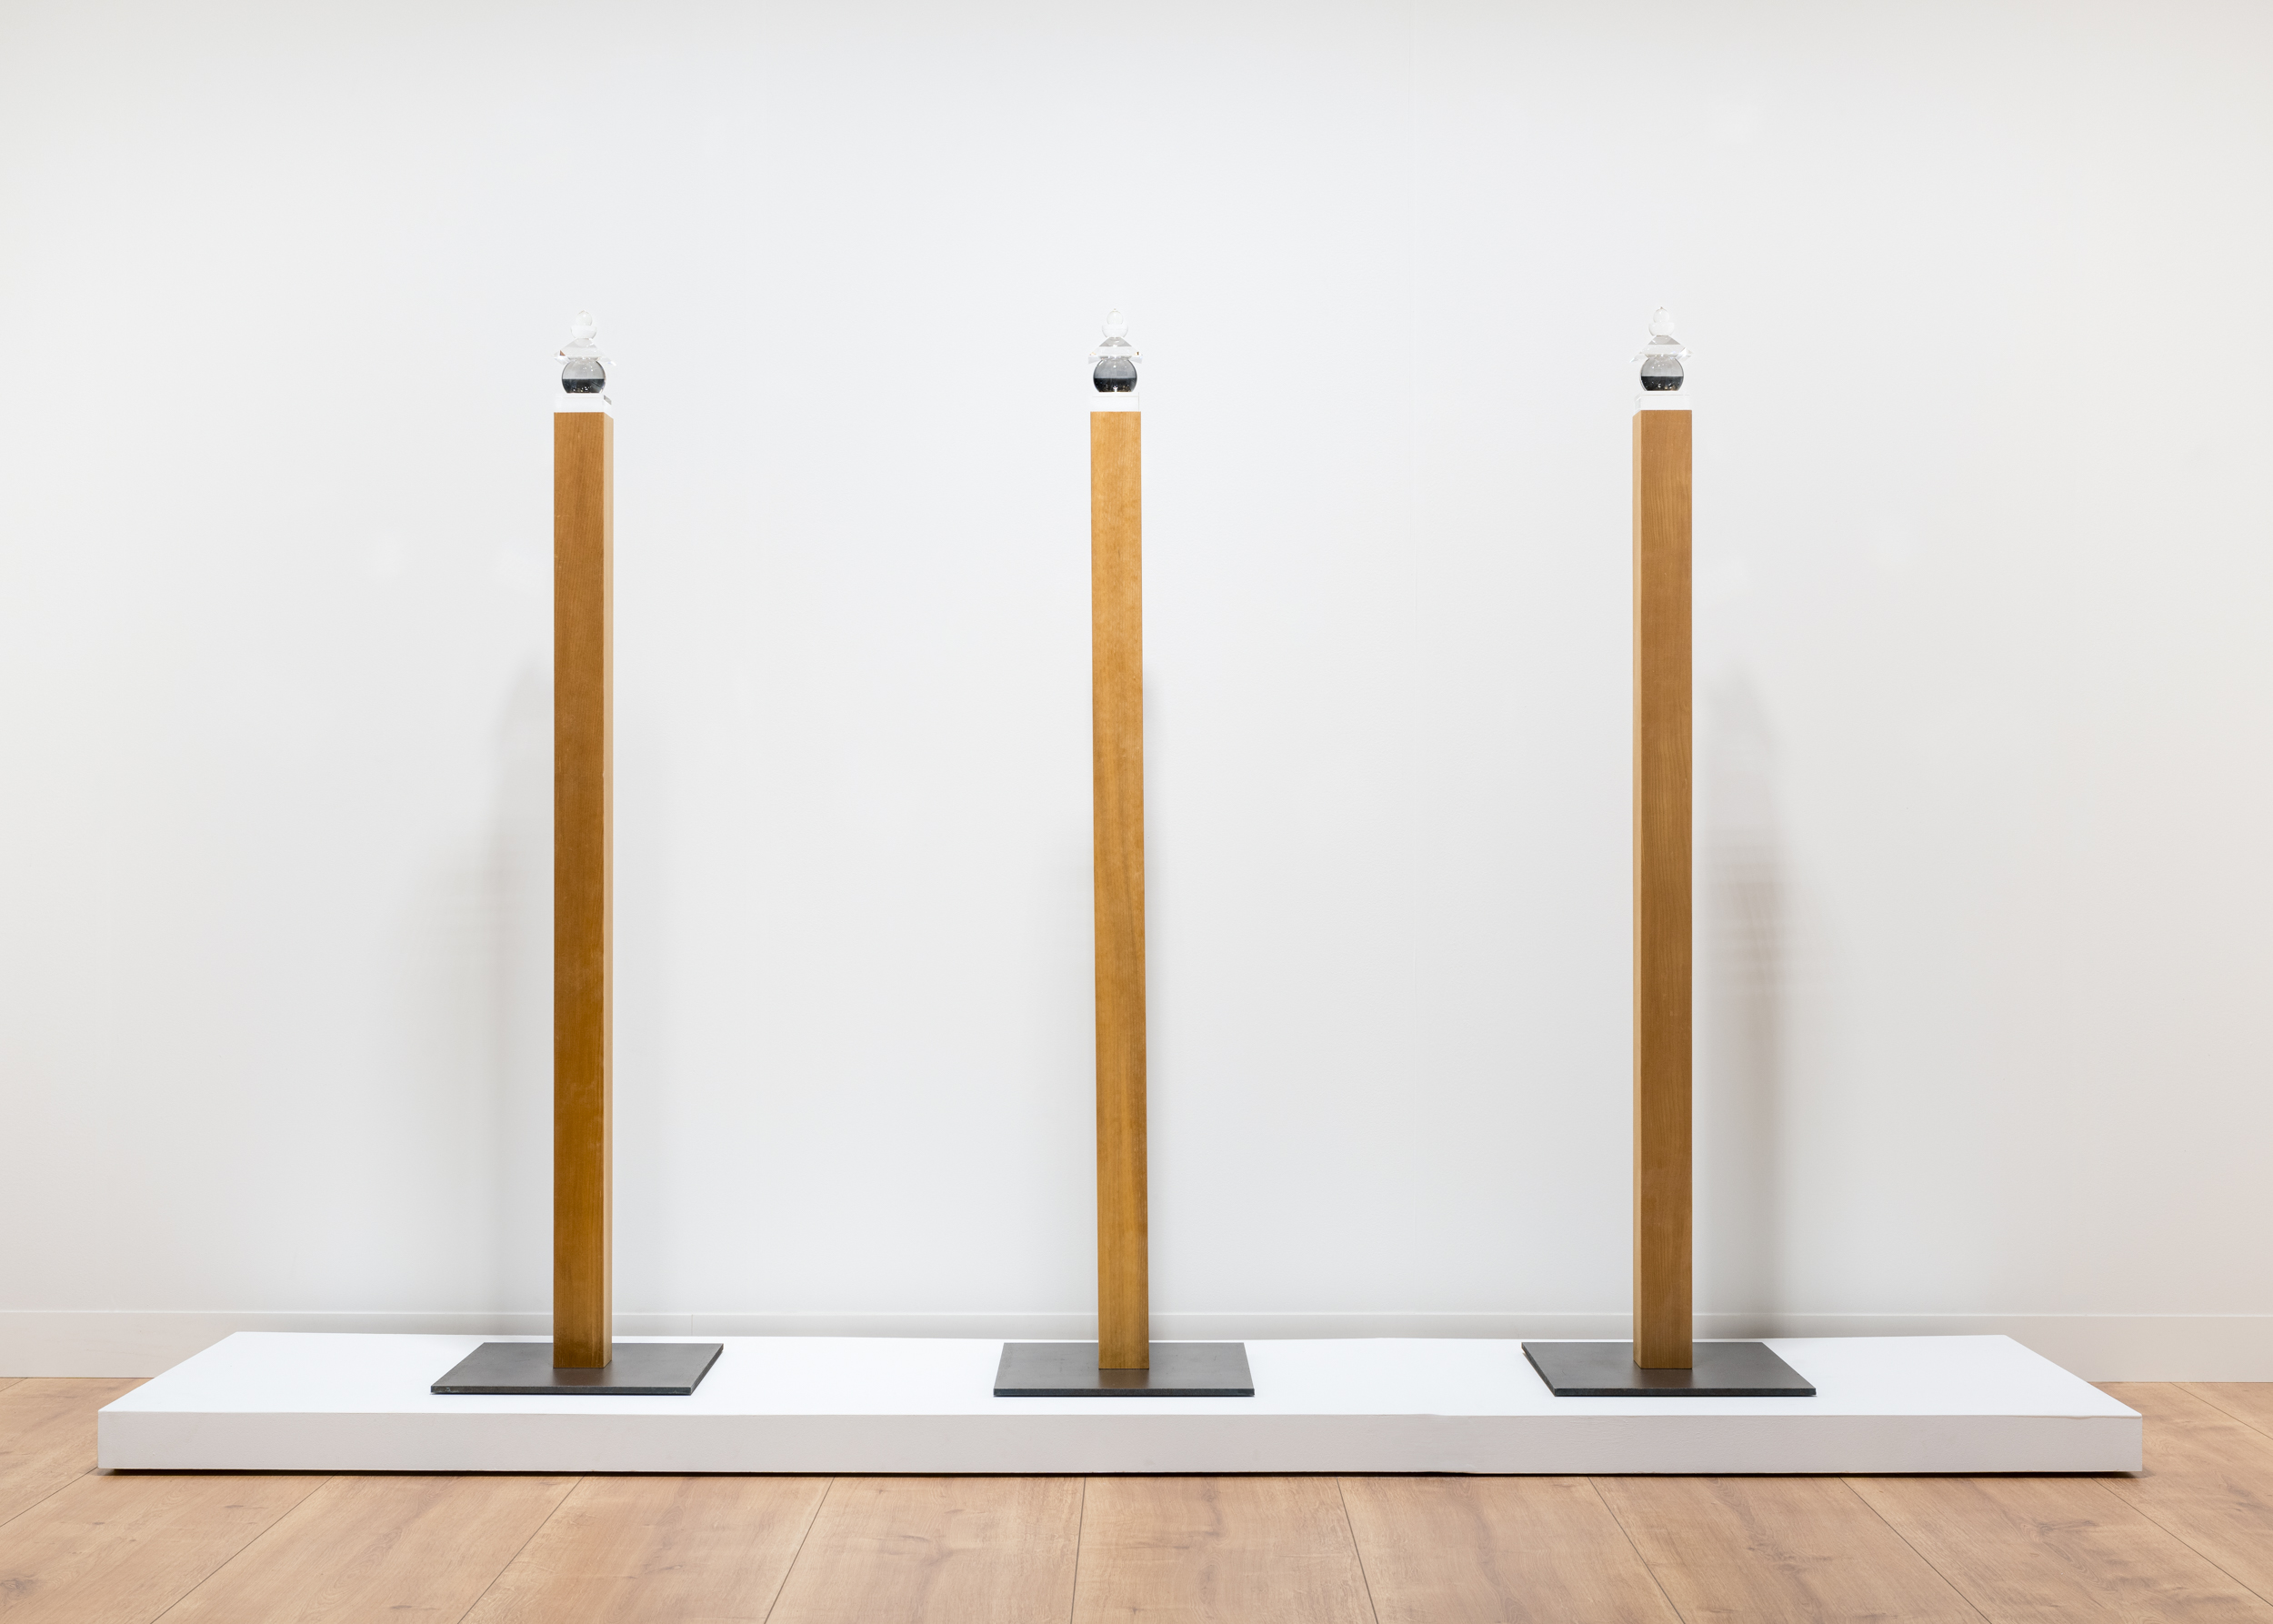 Color image of three sculptures compromised of wood, metal, and glass along a white wall